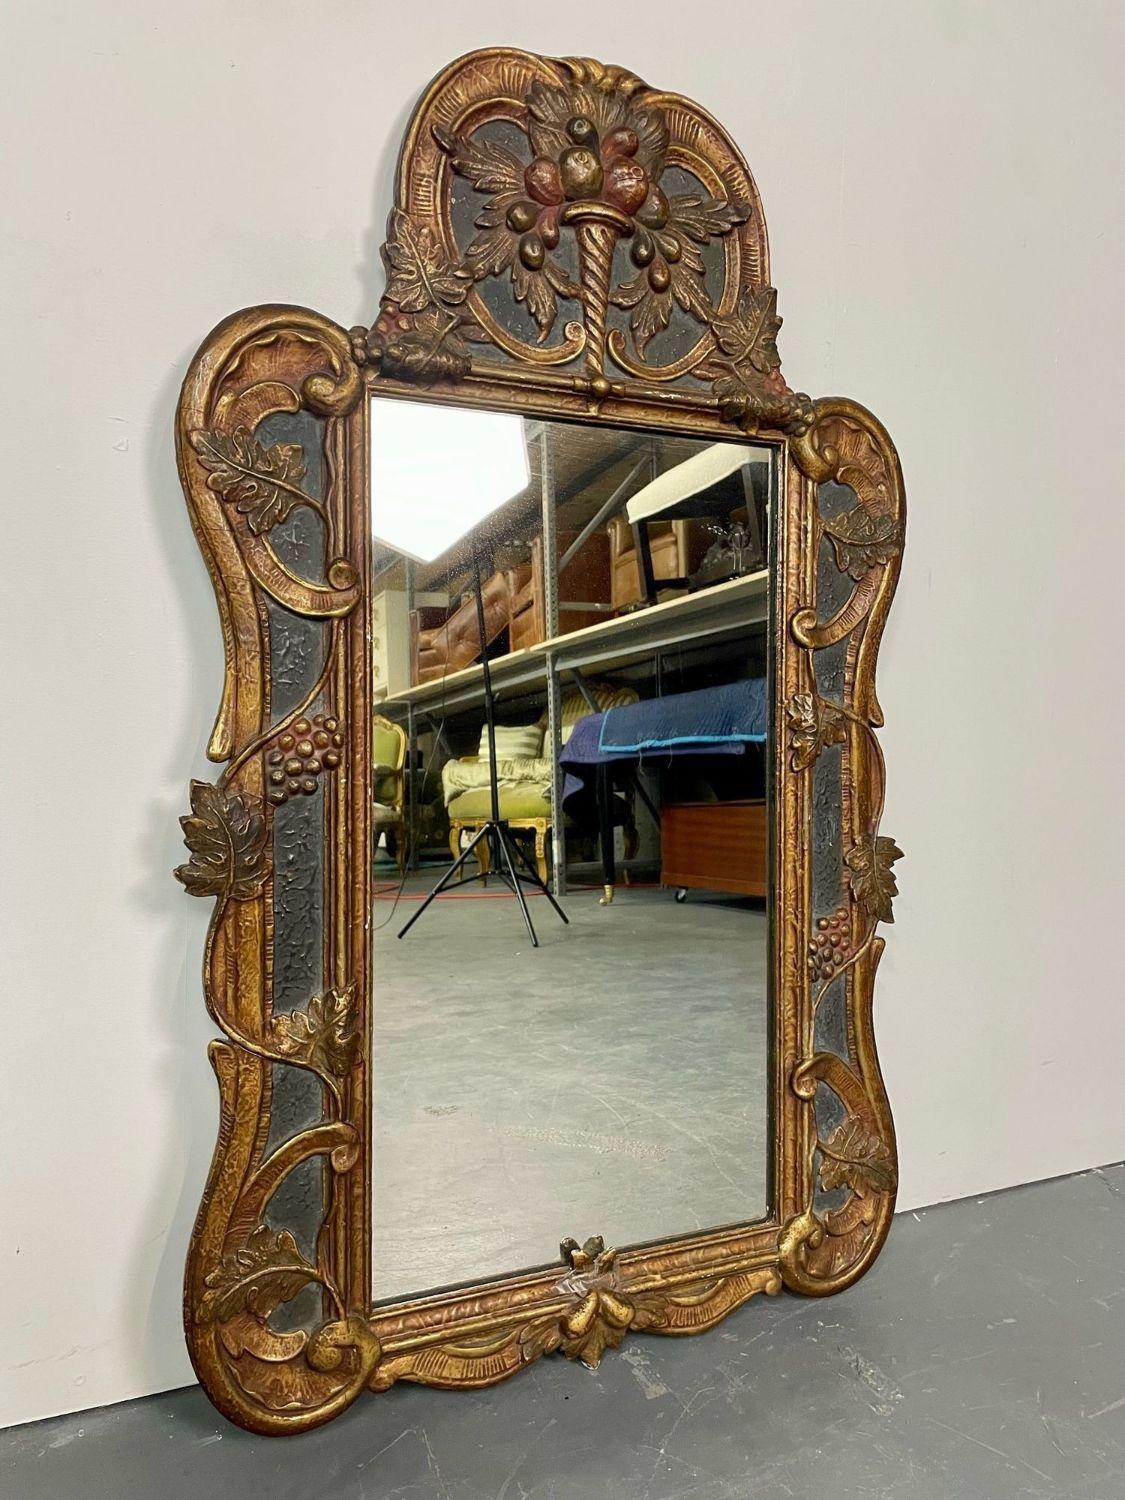 Antique Gustavian Italian wall, console mirror, Cornucopia Motif, Parcel Gilt Decorated
A finely carved and paint decorated wall or console mirror. Late 19th Early 20th century having a mint green paint decorated finish with parcel fire gilt